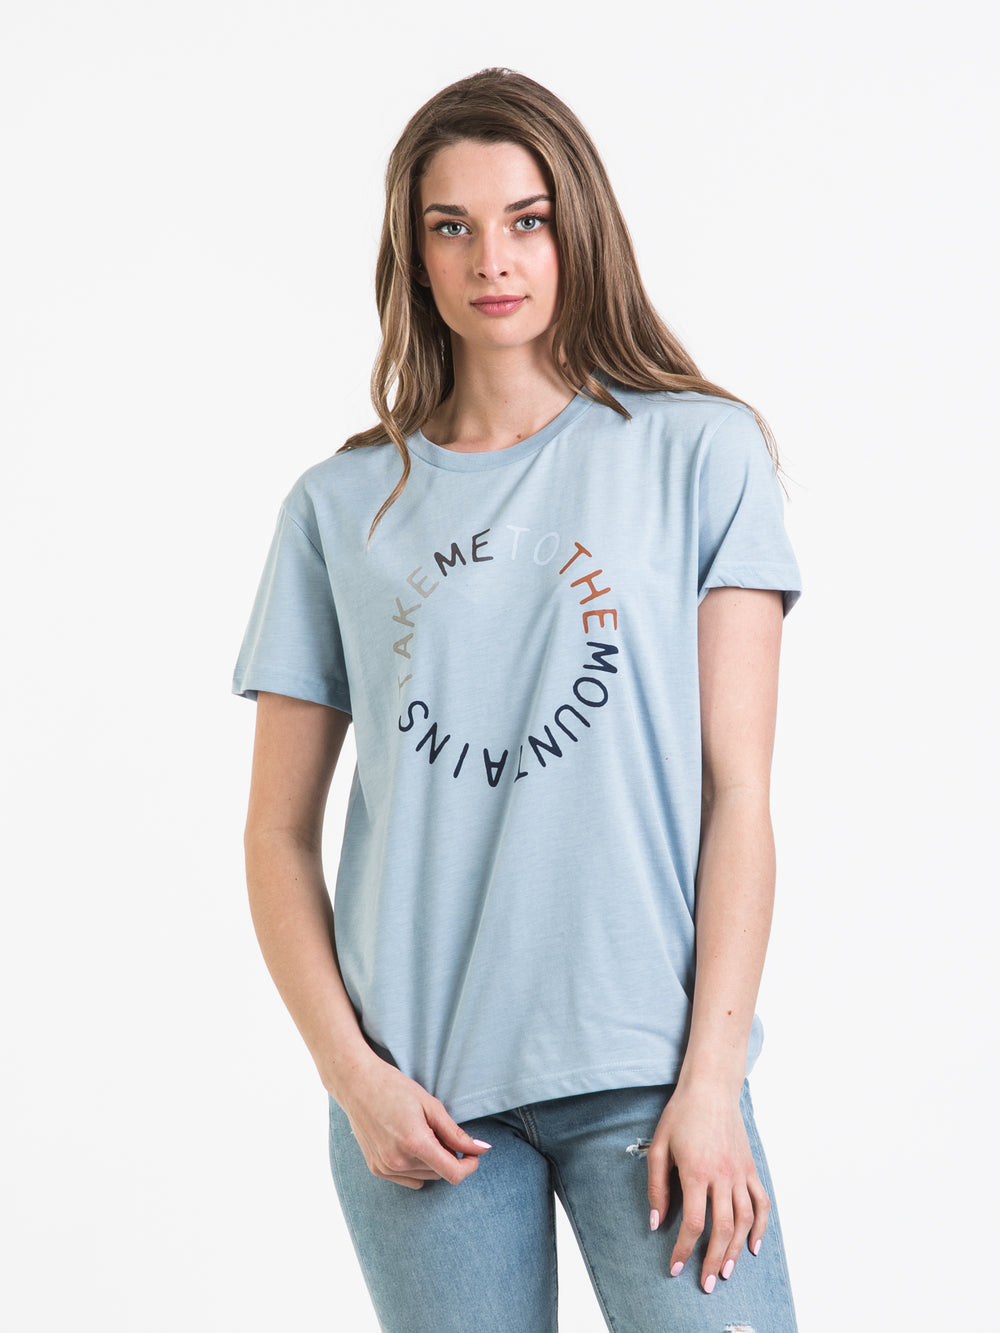 TENTREE TO THE MOUNTAINS T-SHIRT - CLEARANCE